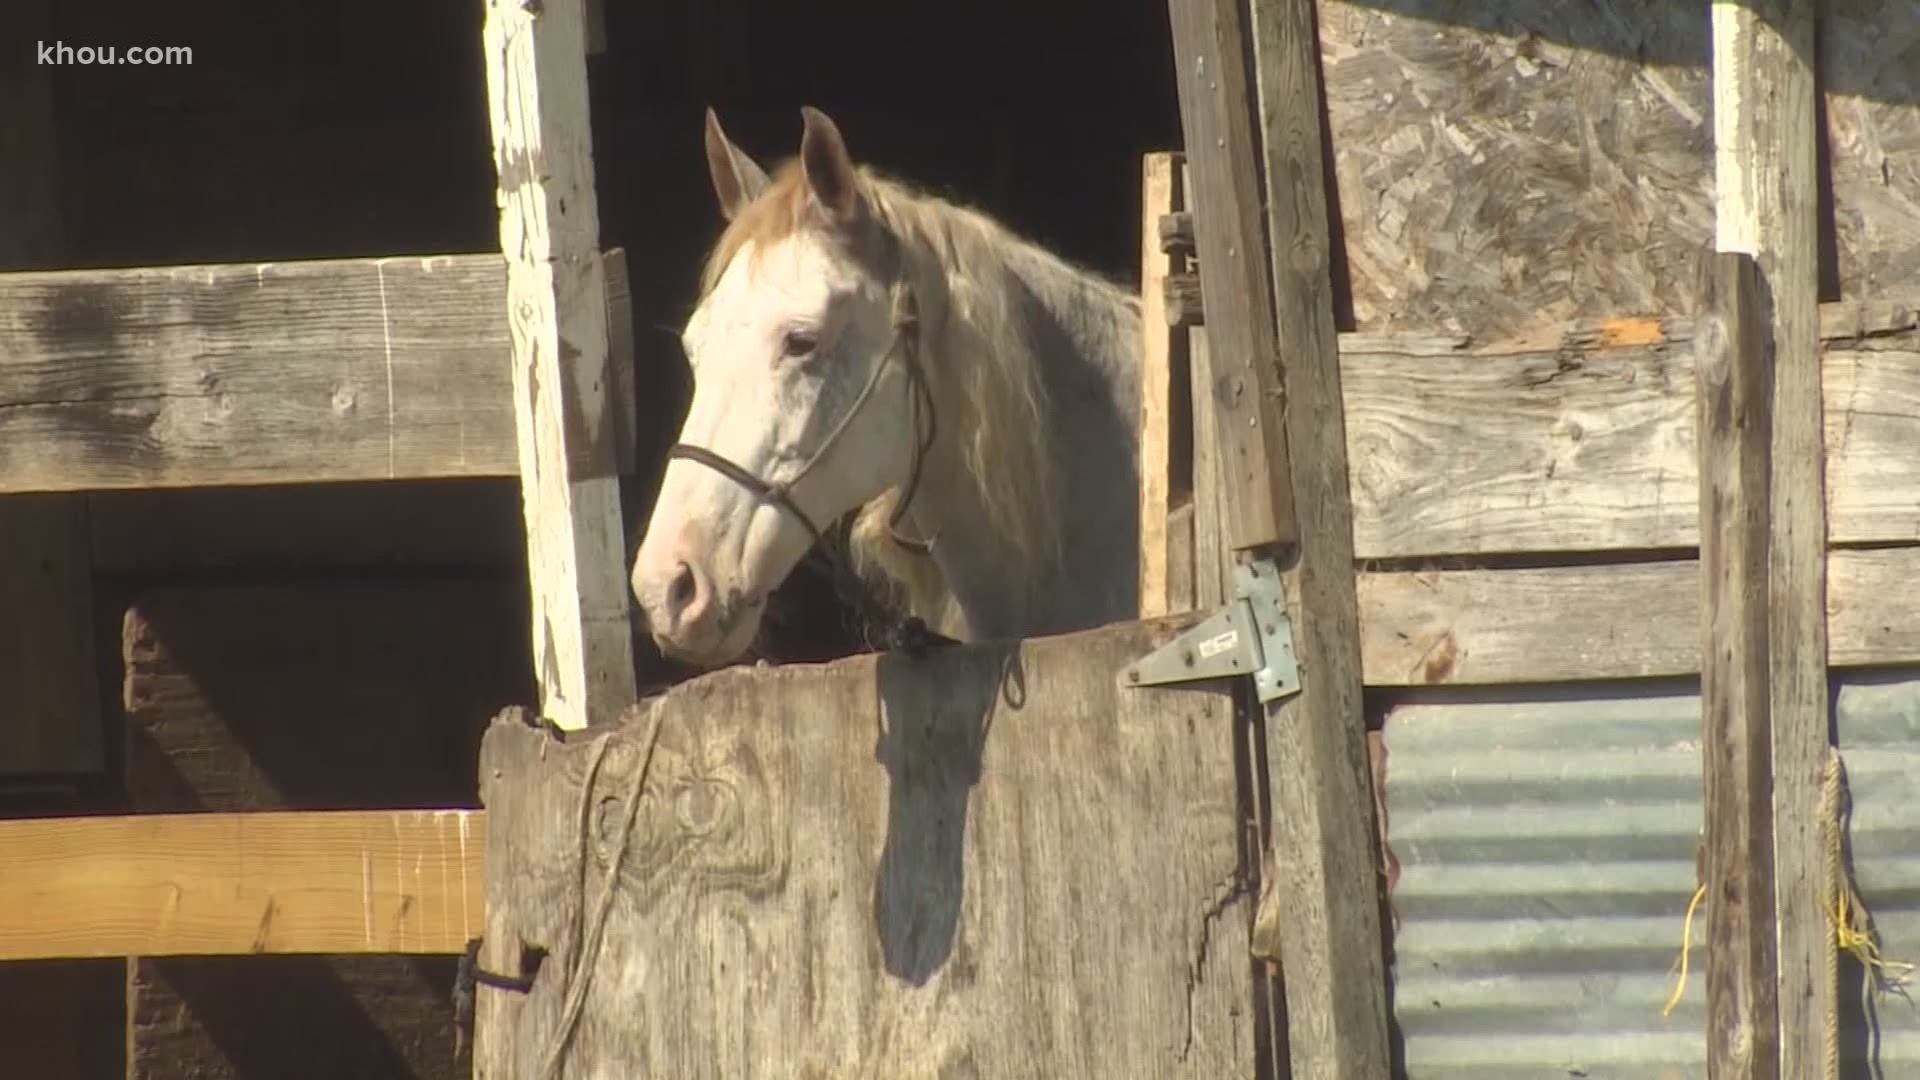 Authorities are asking horse owners to be extra vigilant as they continue to search for the person, or people, responsible for slaughtering five horses since May.